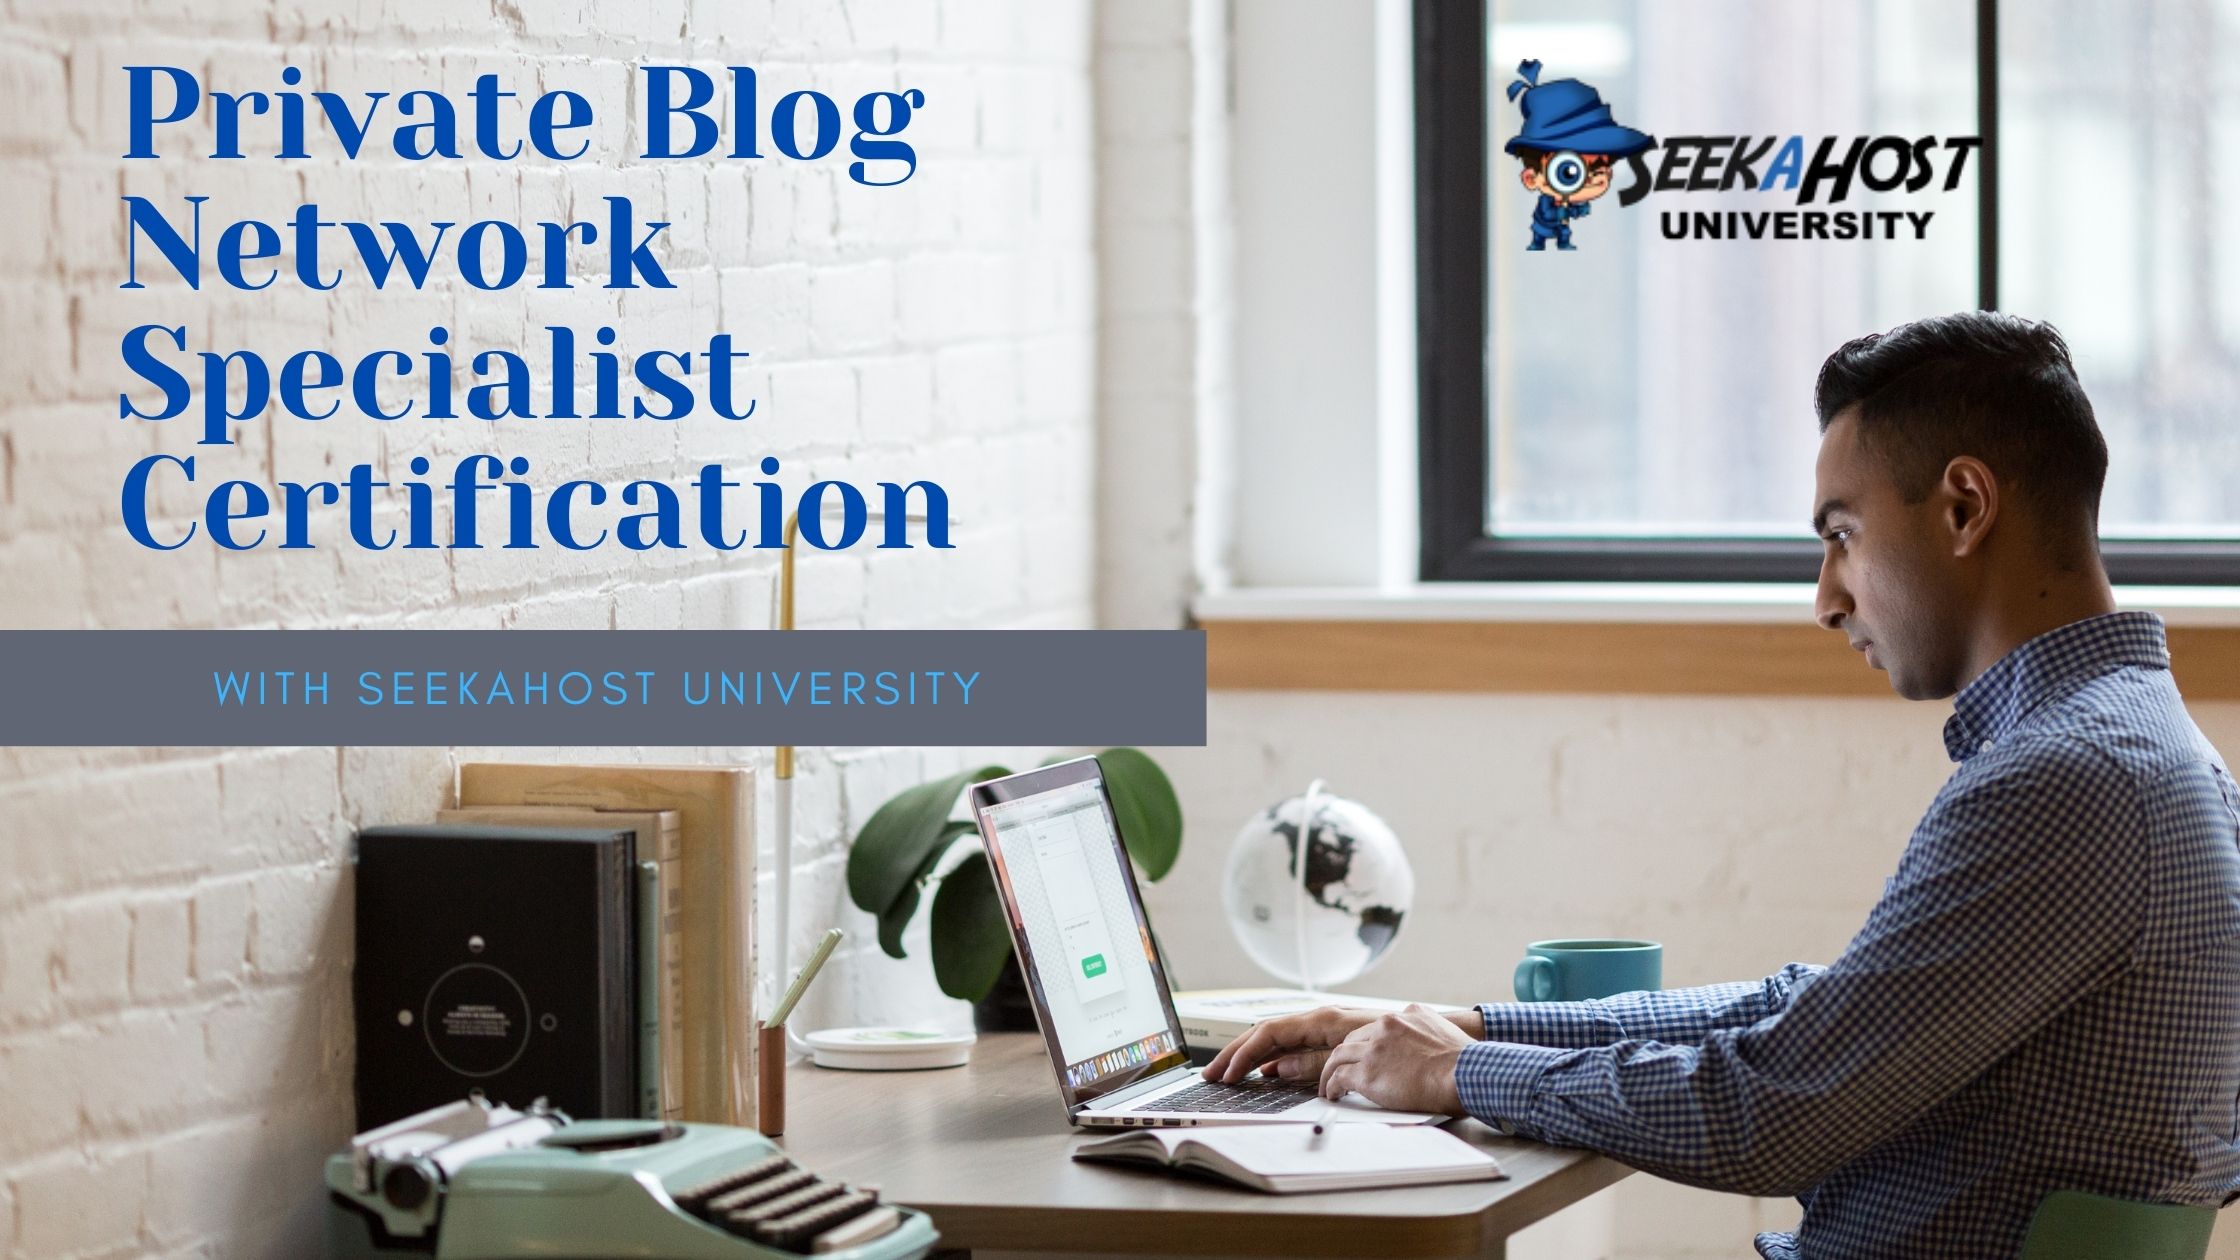 become a private blog network specialist with the seekahost university training